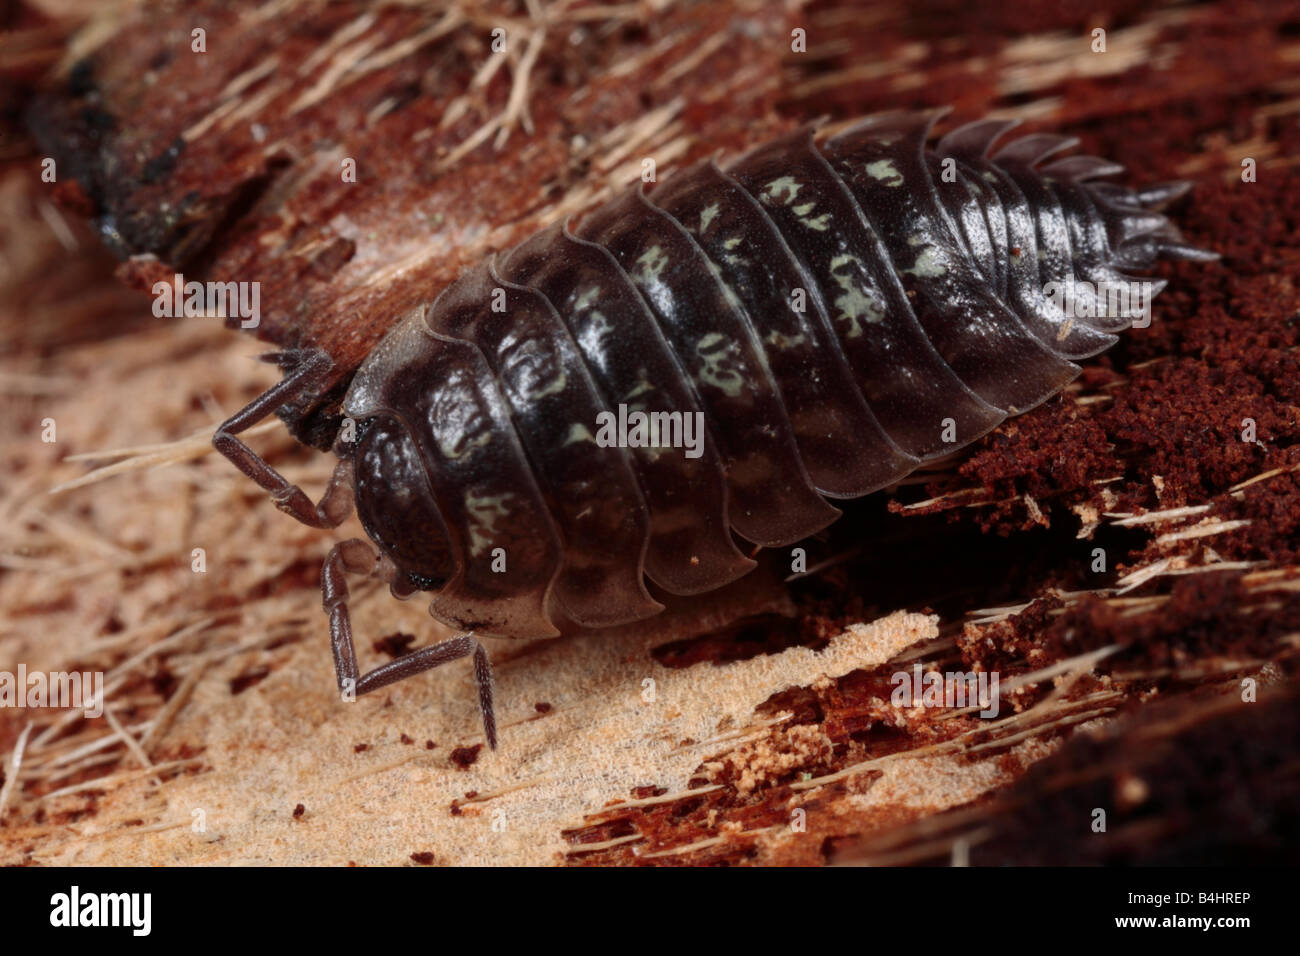 Woodlouse (Oniscus asellus). Powys, Wales. Stock Photo